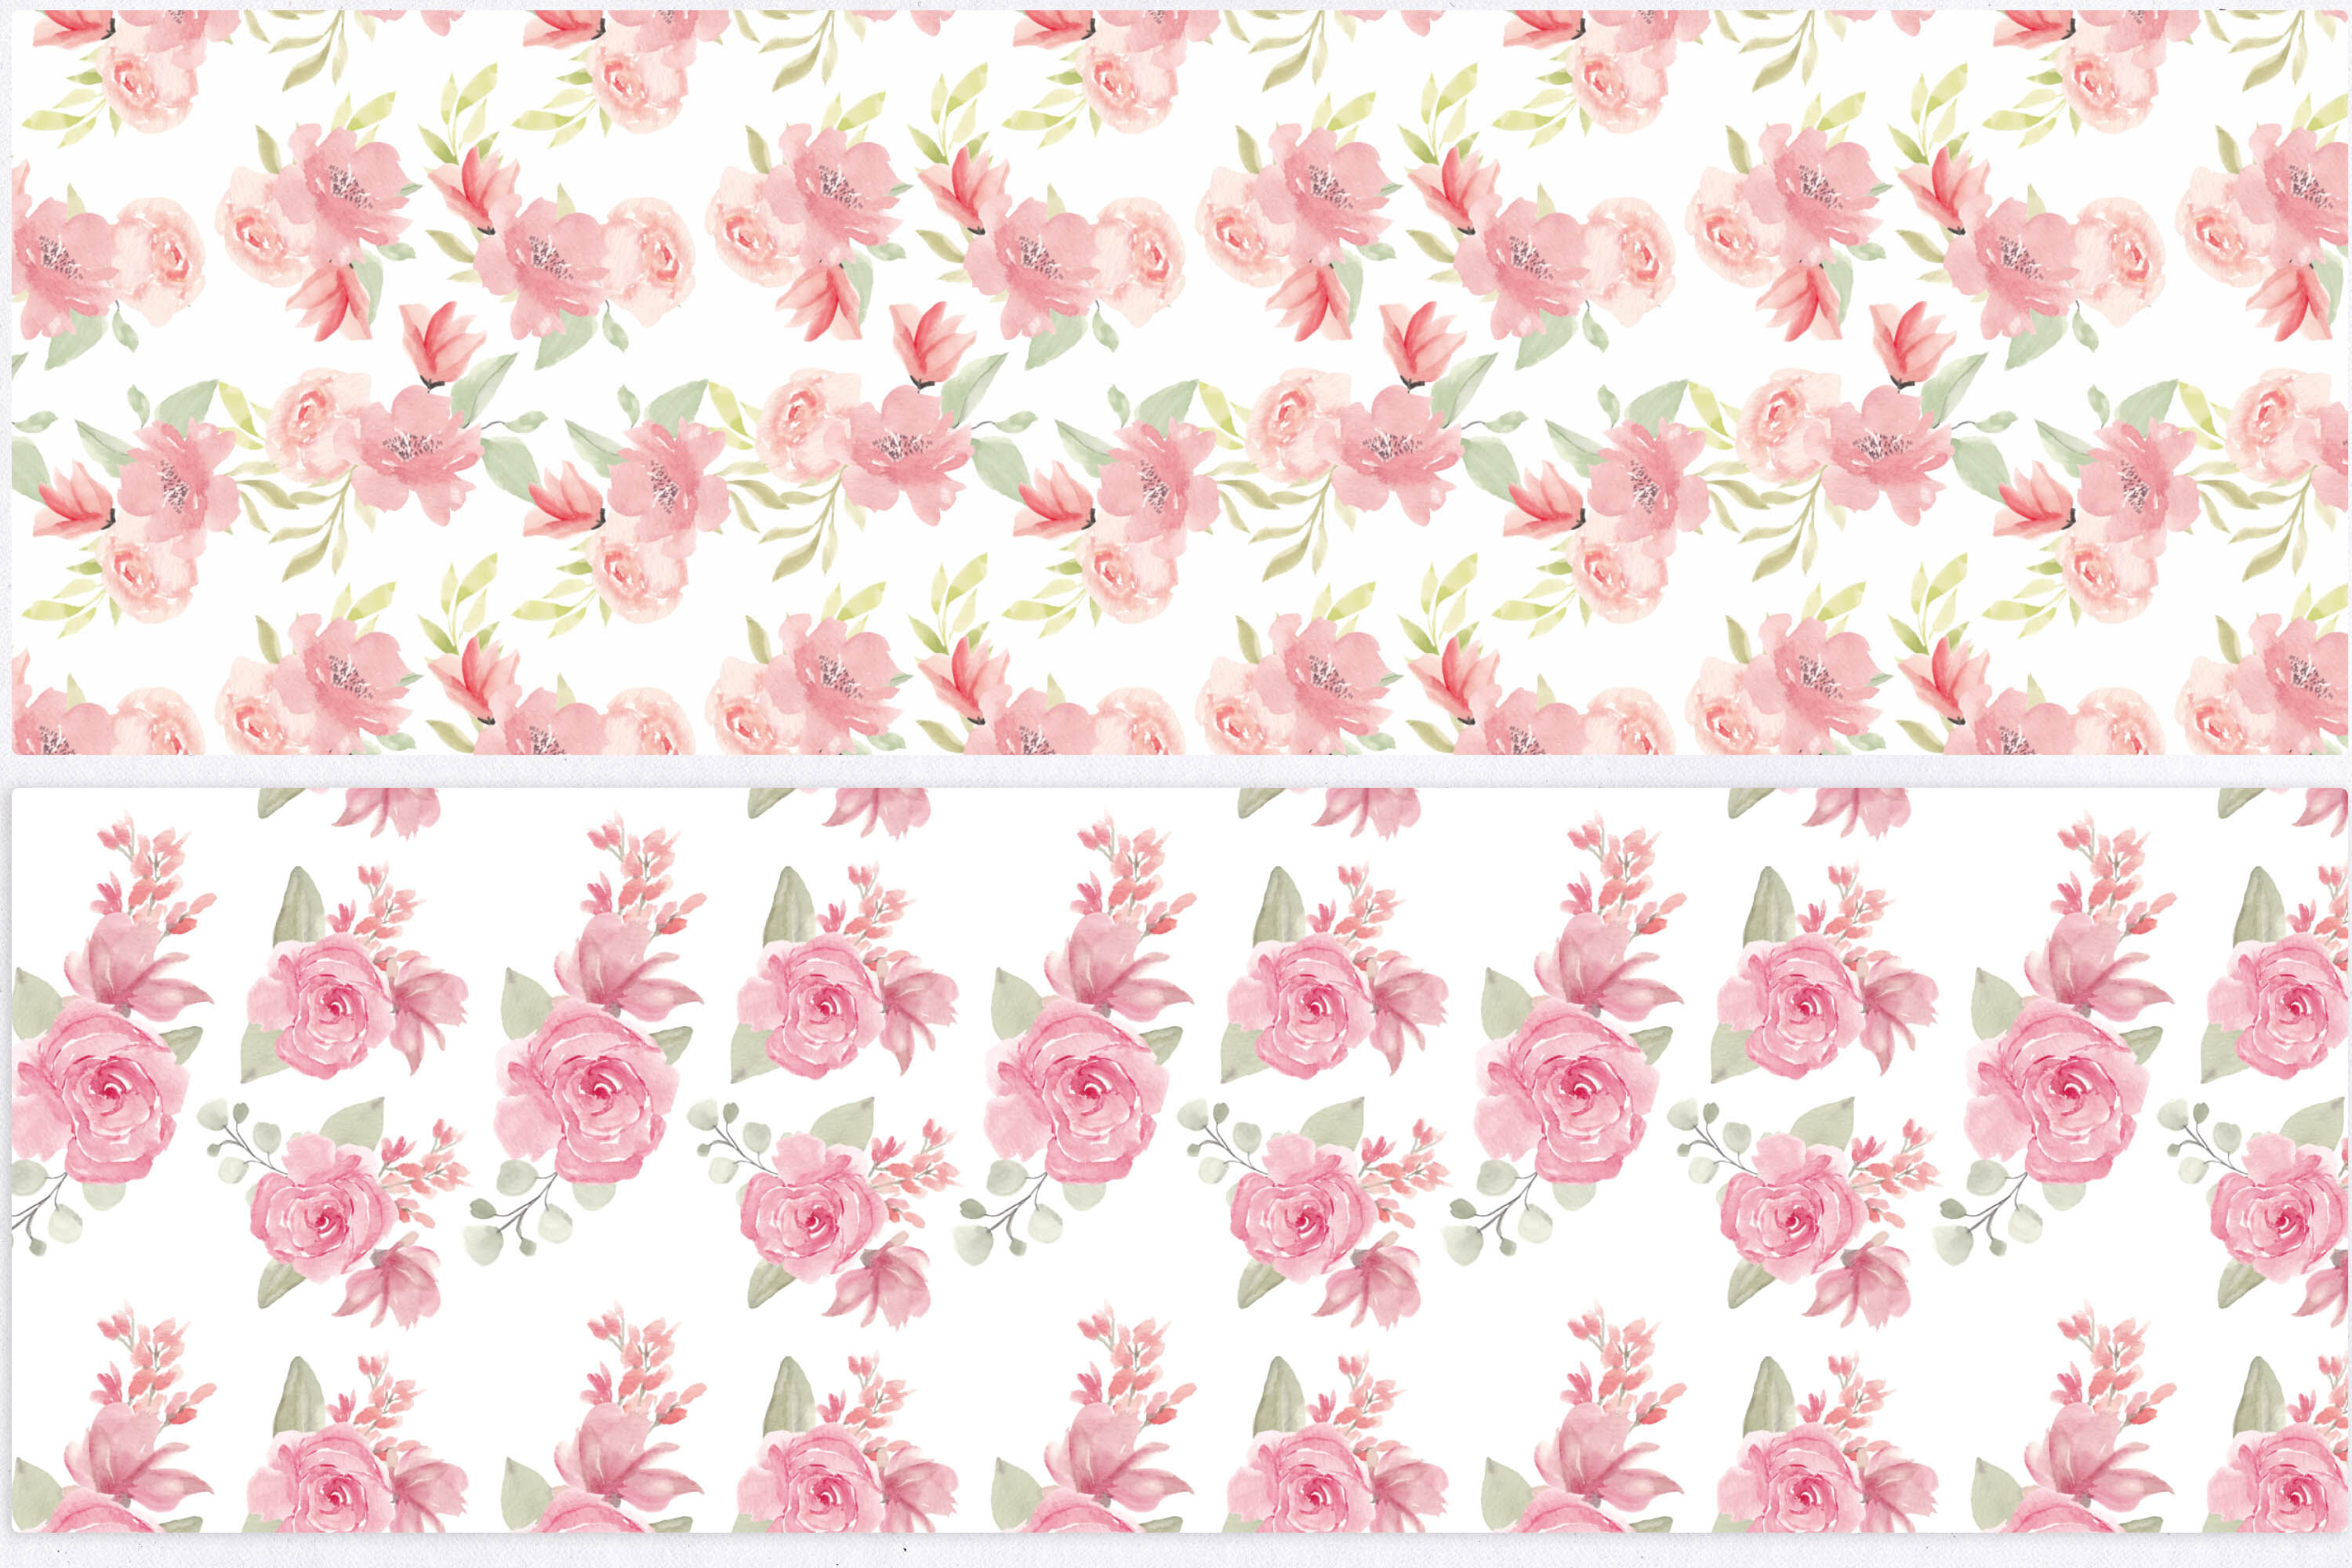 Watercolor Pink Flower Seamless Pattern Graphic by elsabenaa